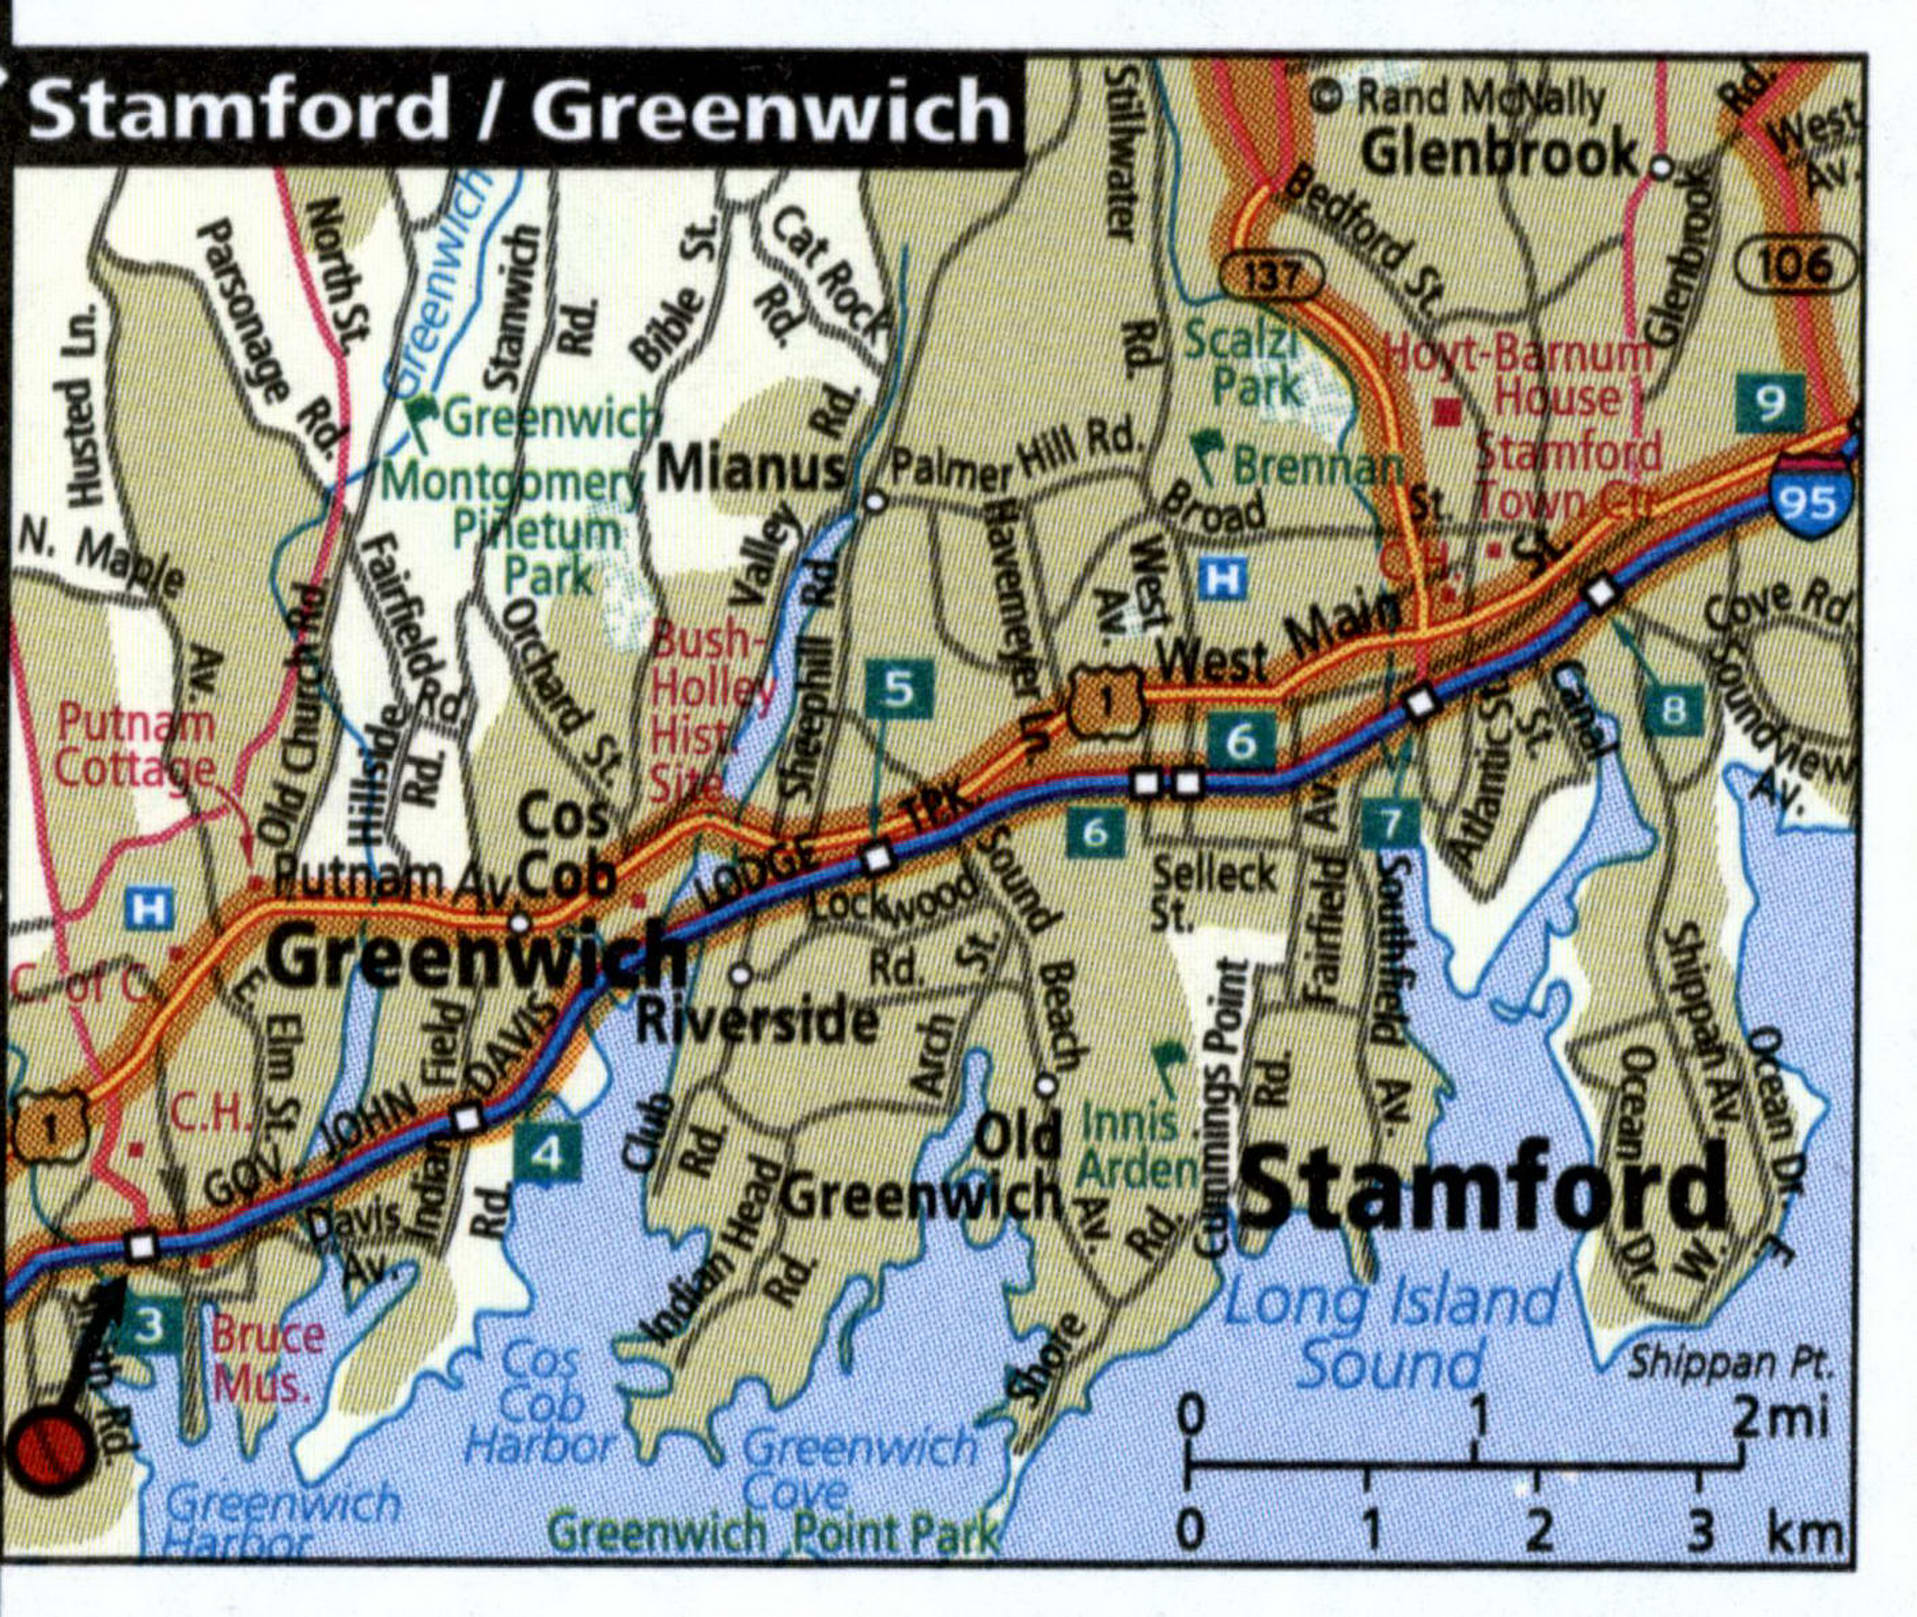 Stamford city map for truckers